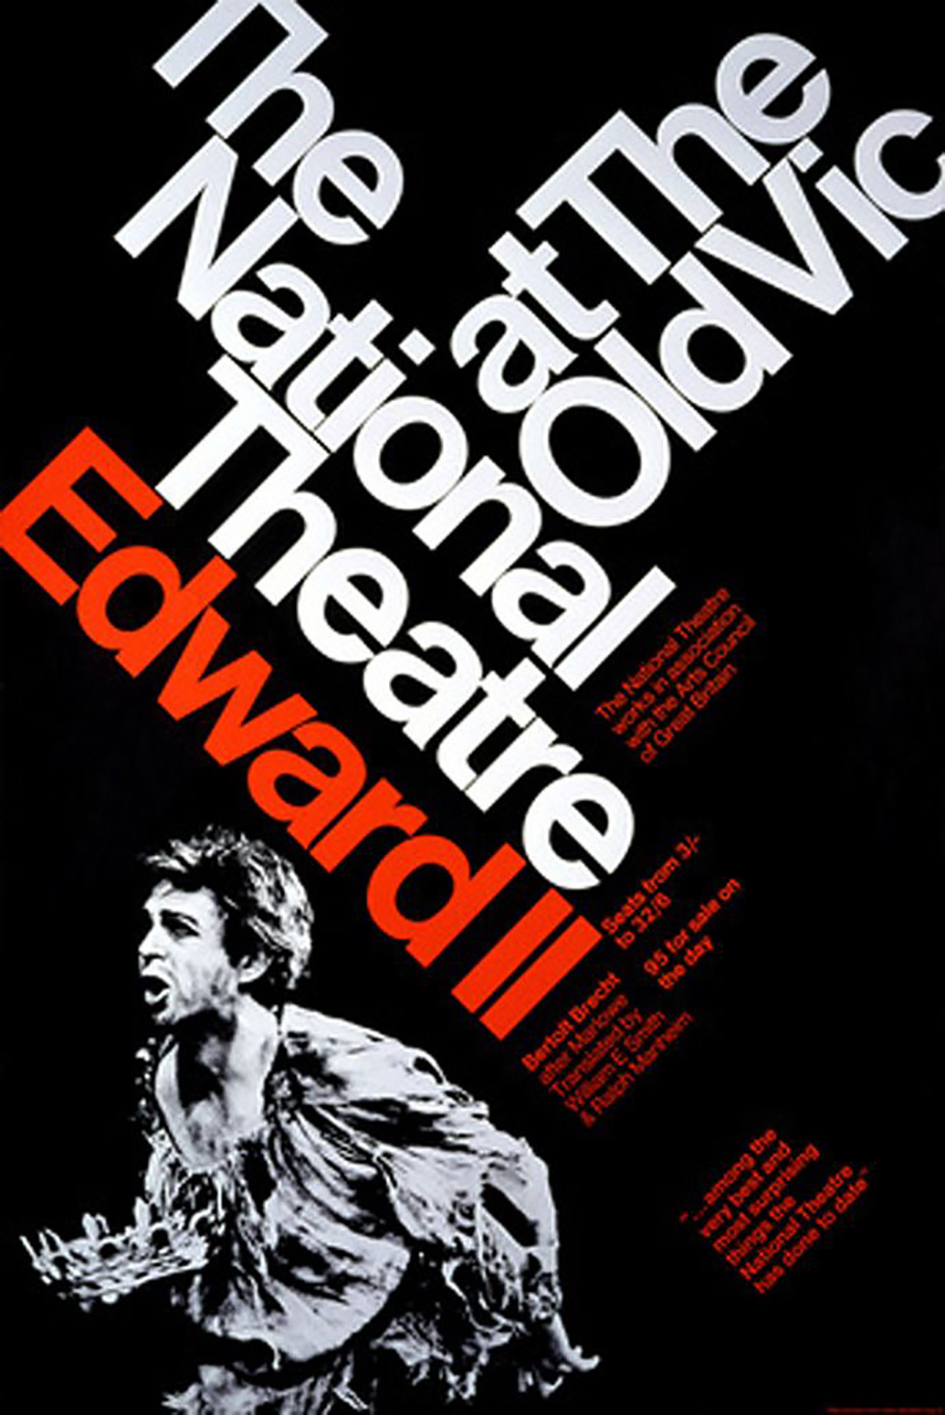 Design Is The Real Star In National Theatre Posters Typographic Legacy Typeroom